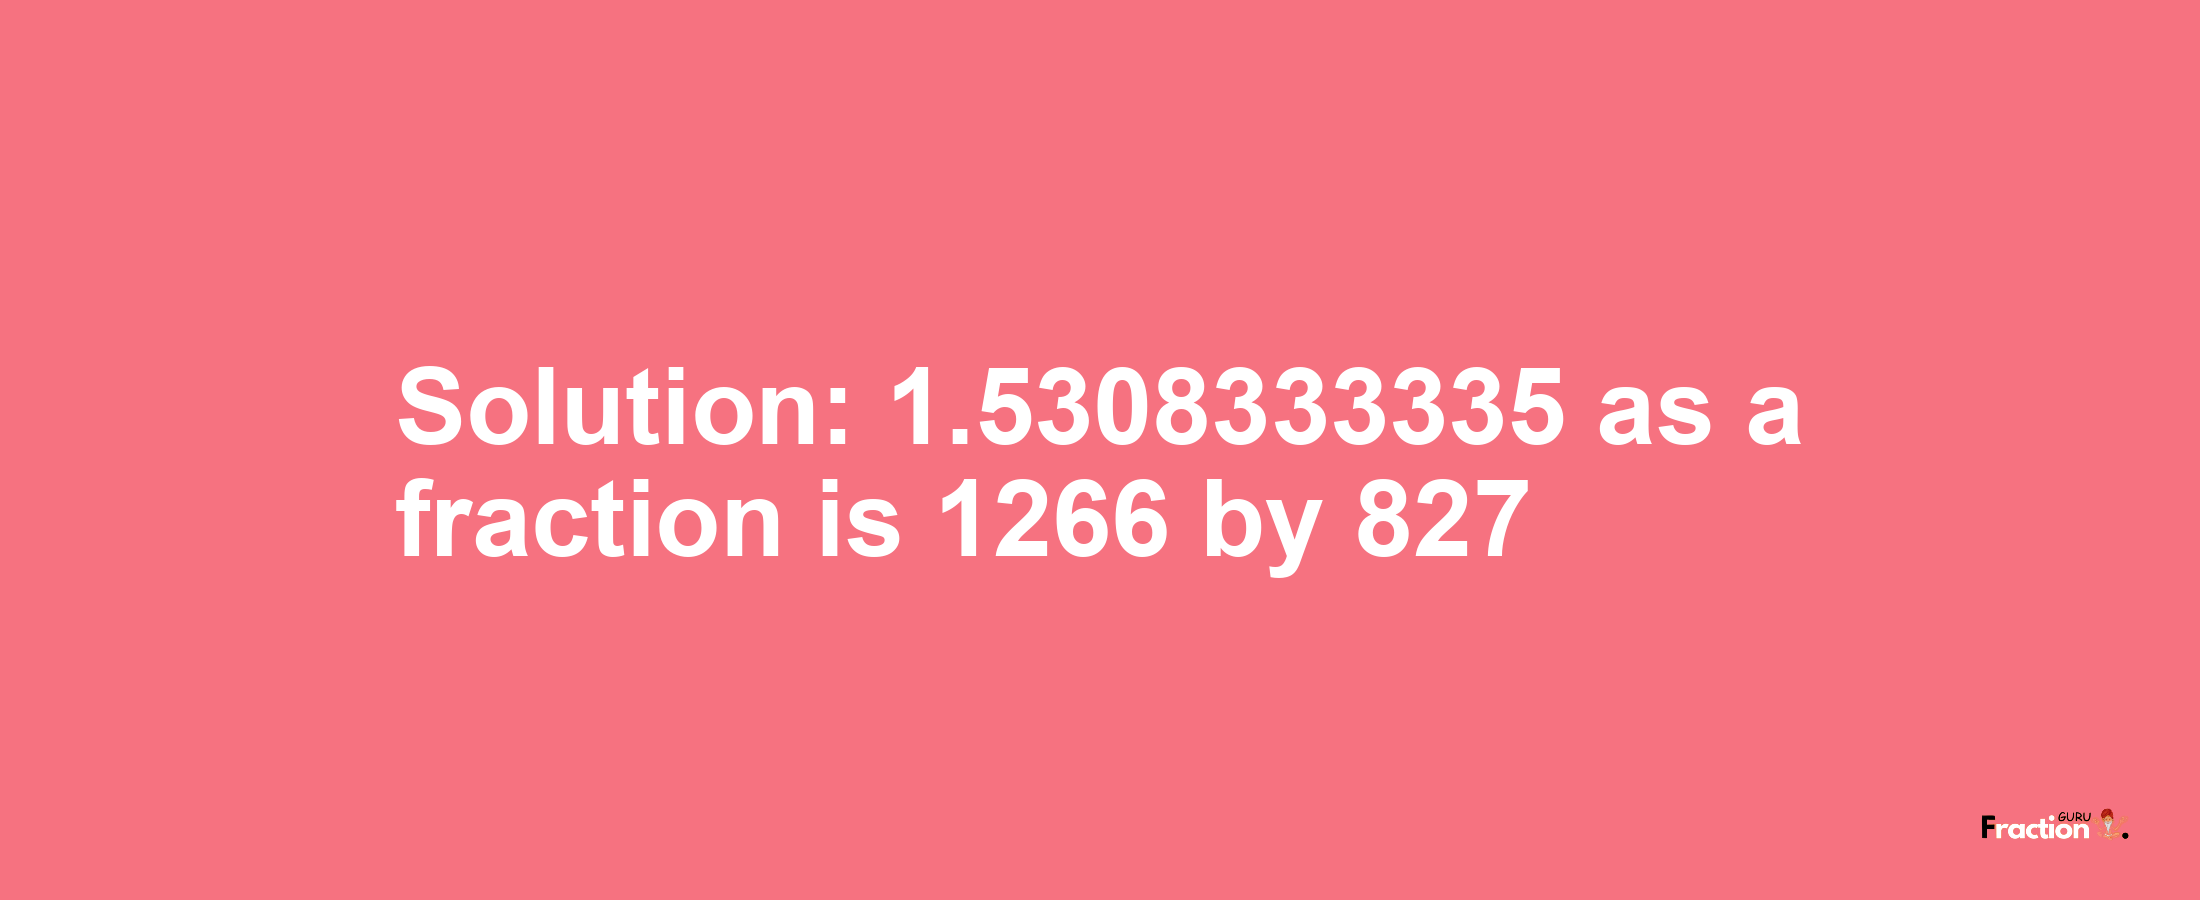 Solution:1.5308333335 as a fraction is 1266/827